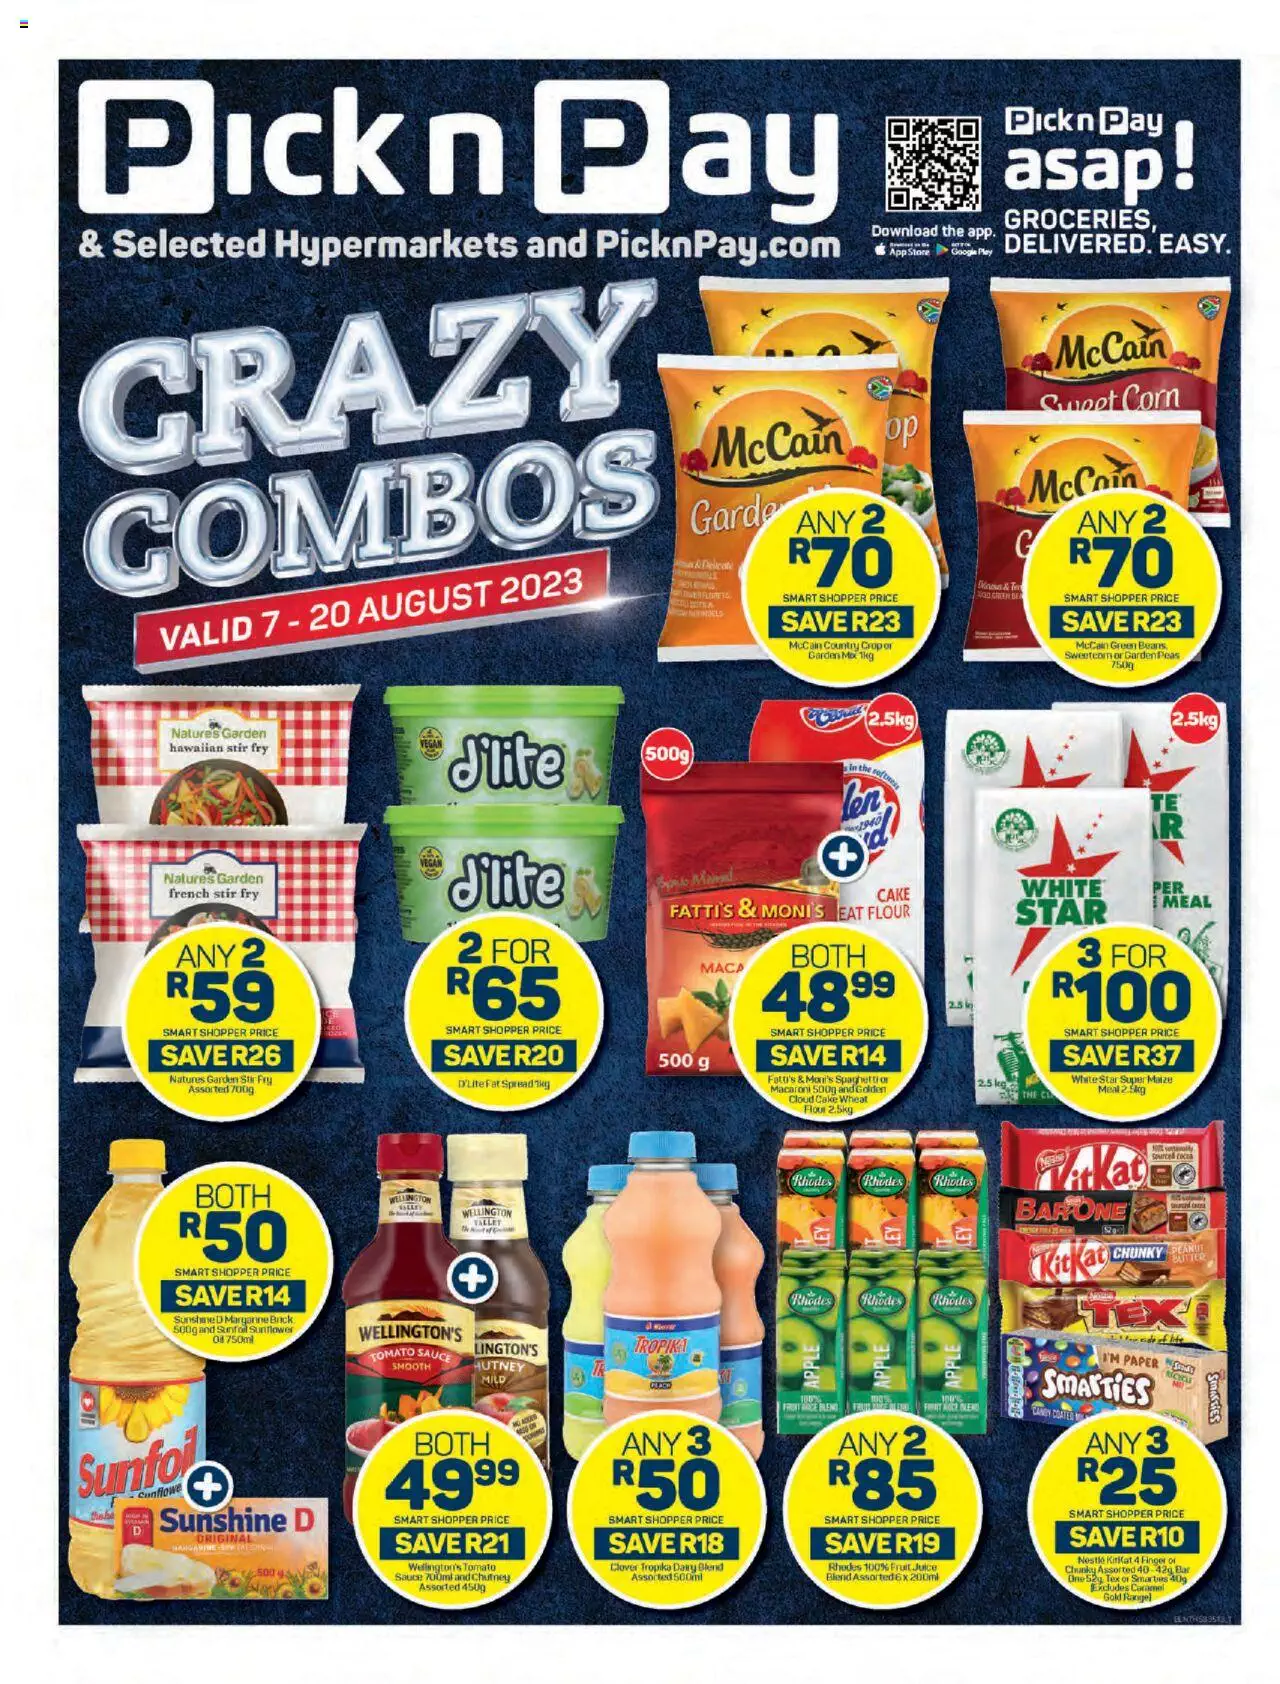 Pick n Pay Specials Crazy Combos 7 – 20 August 2023